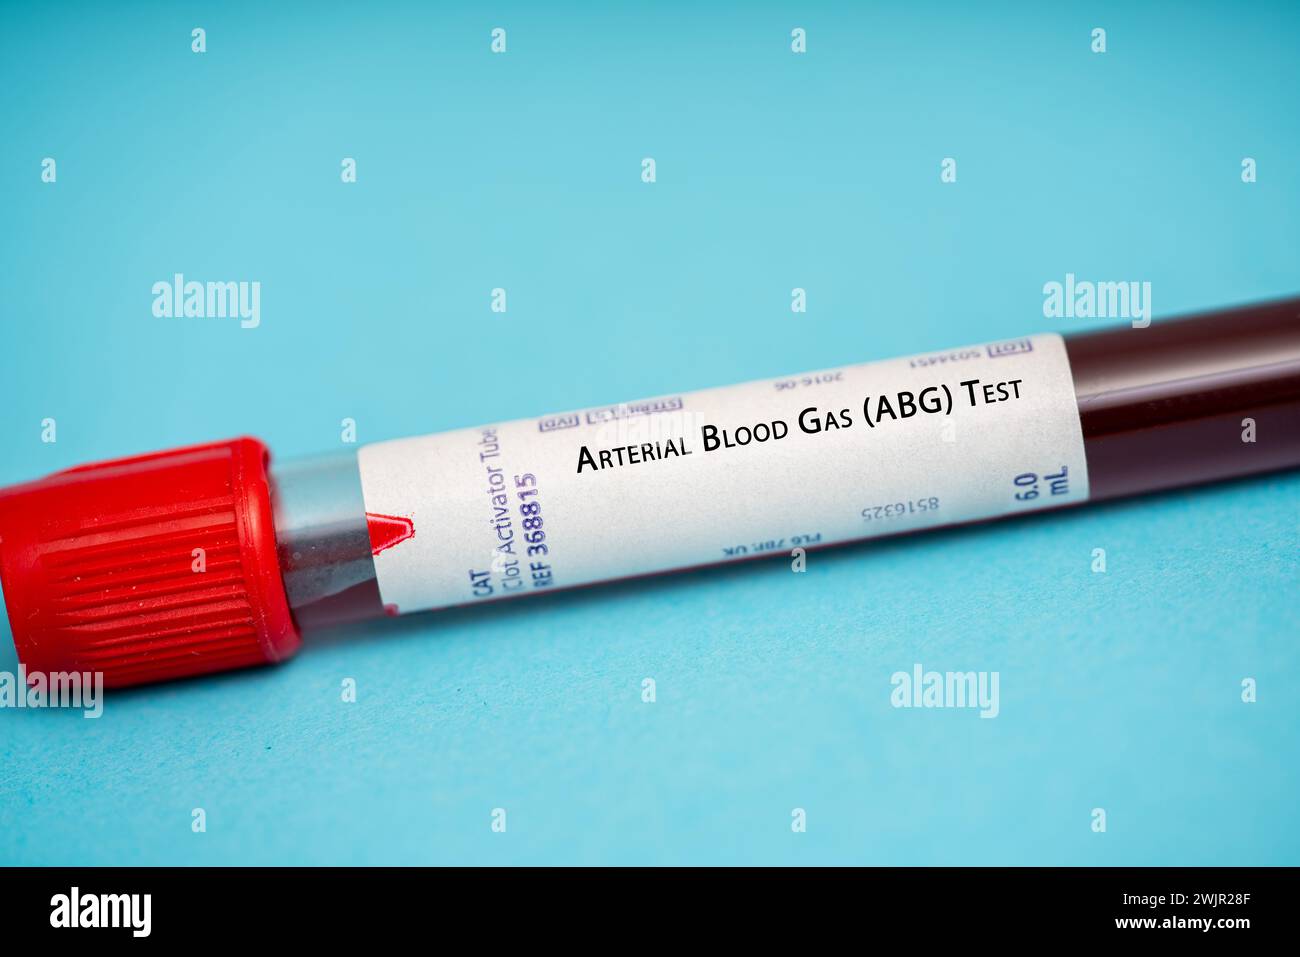 Arterial blood gas test Stock Photo